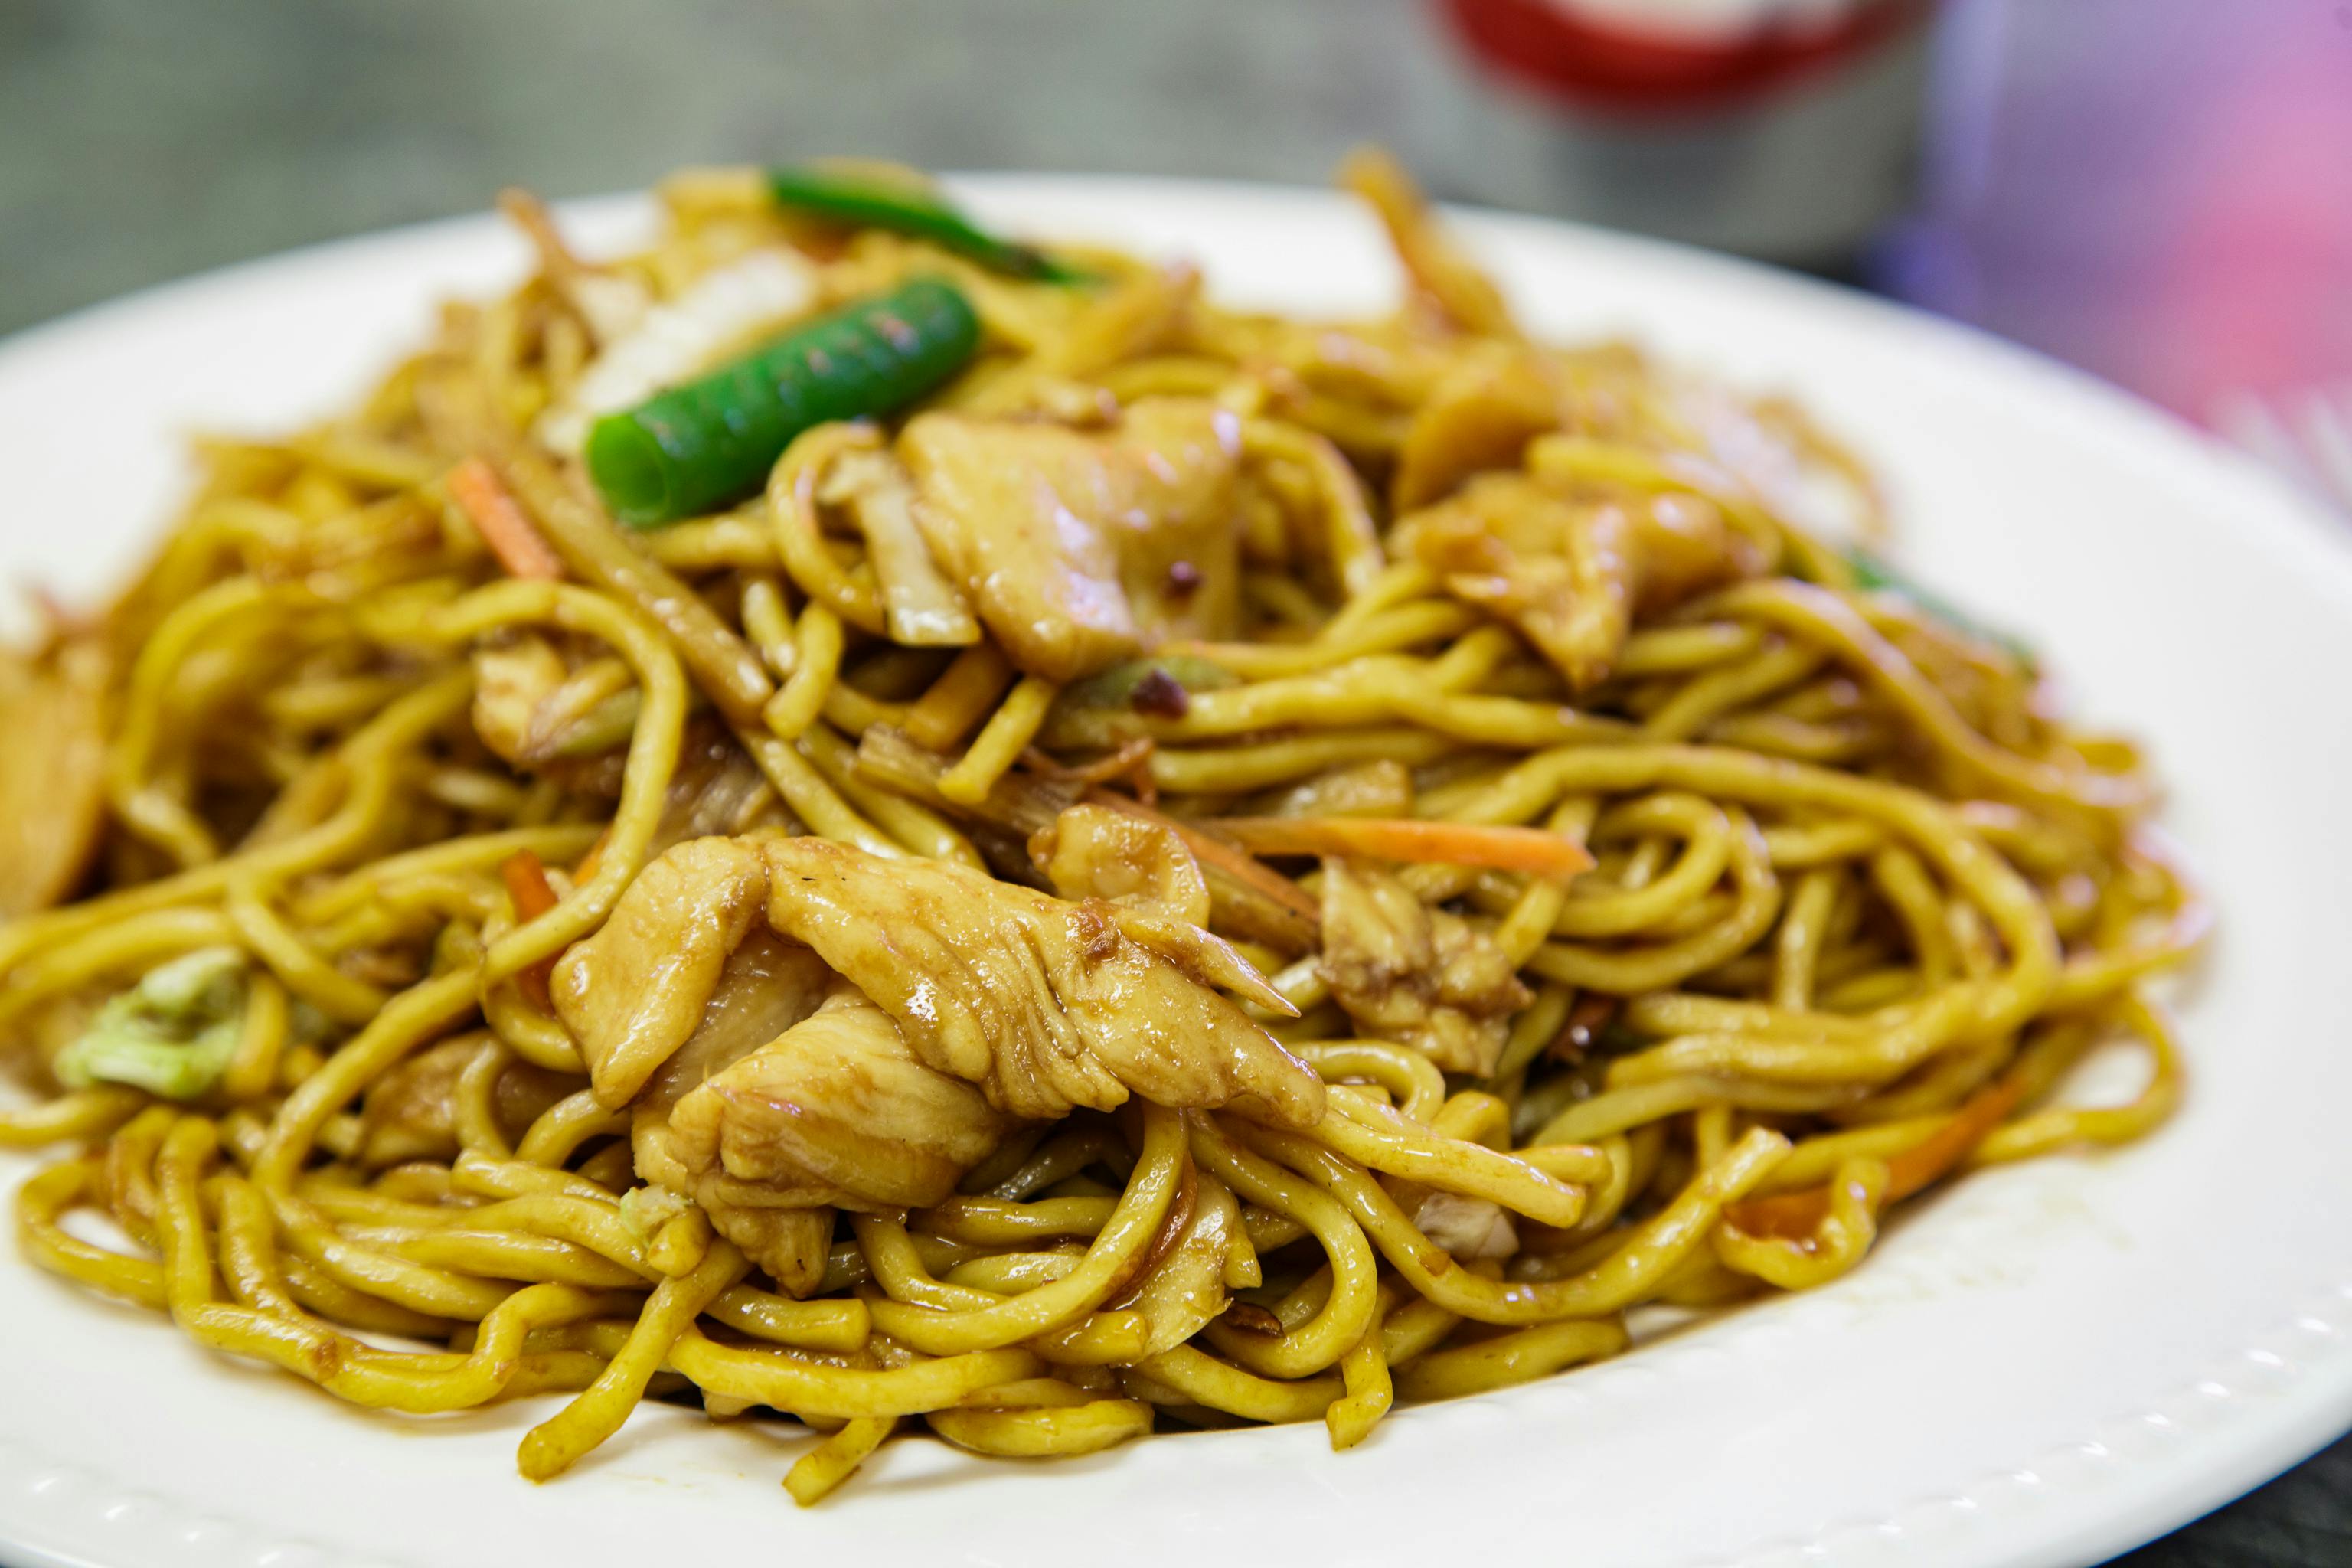 31. Chicken Lo Mein from China Wok in Madison, WI